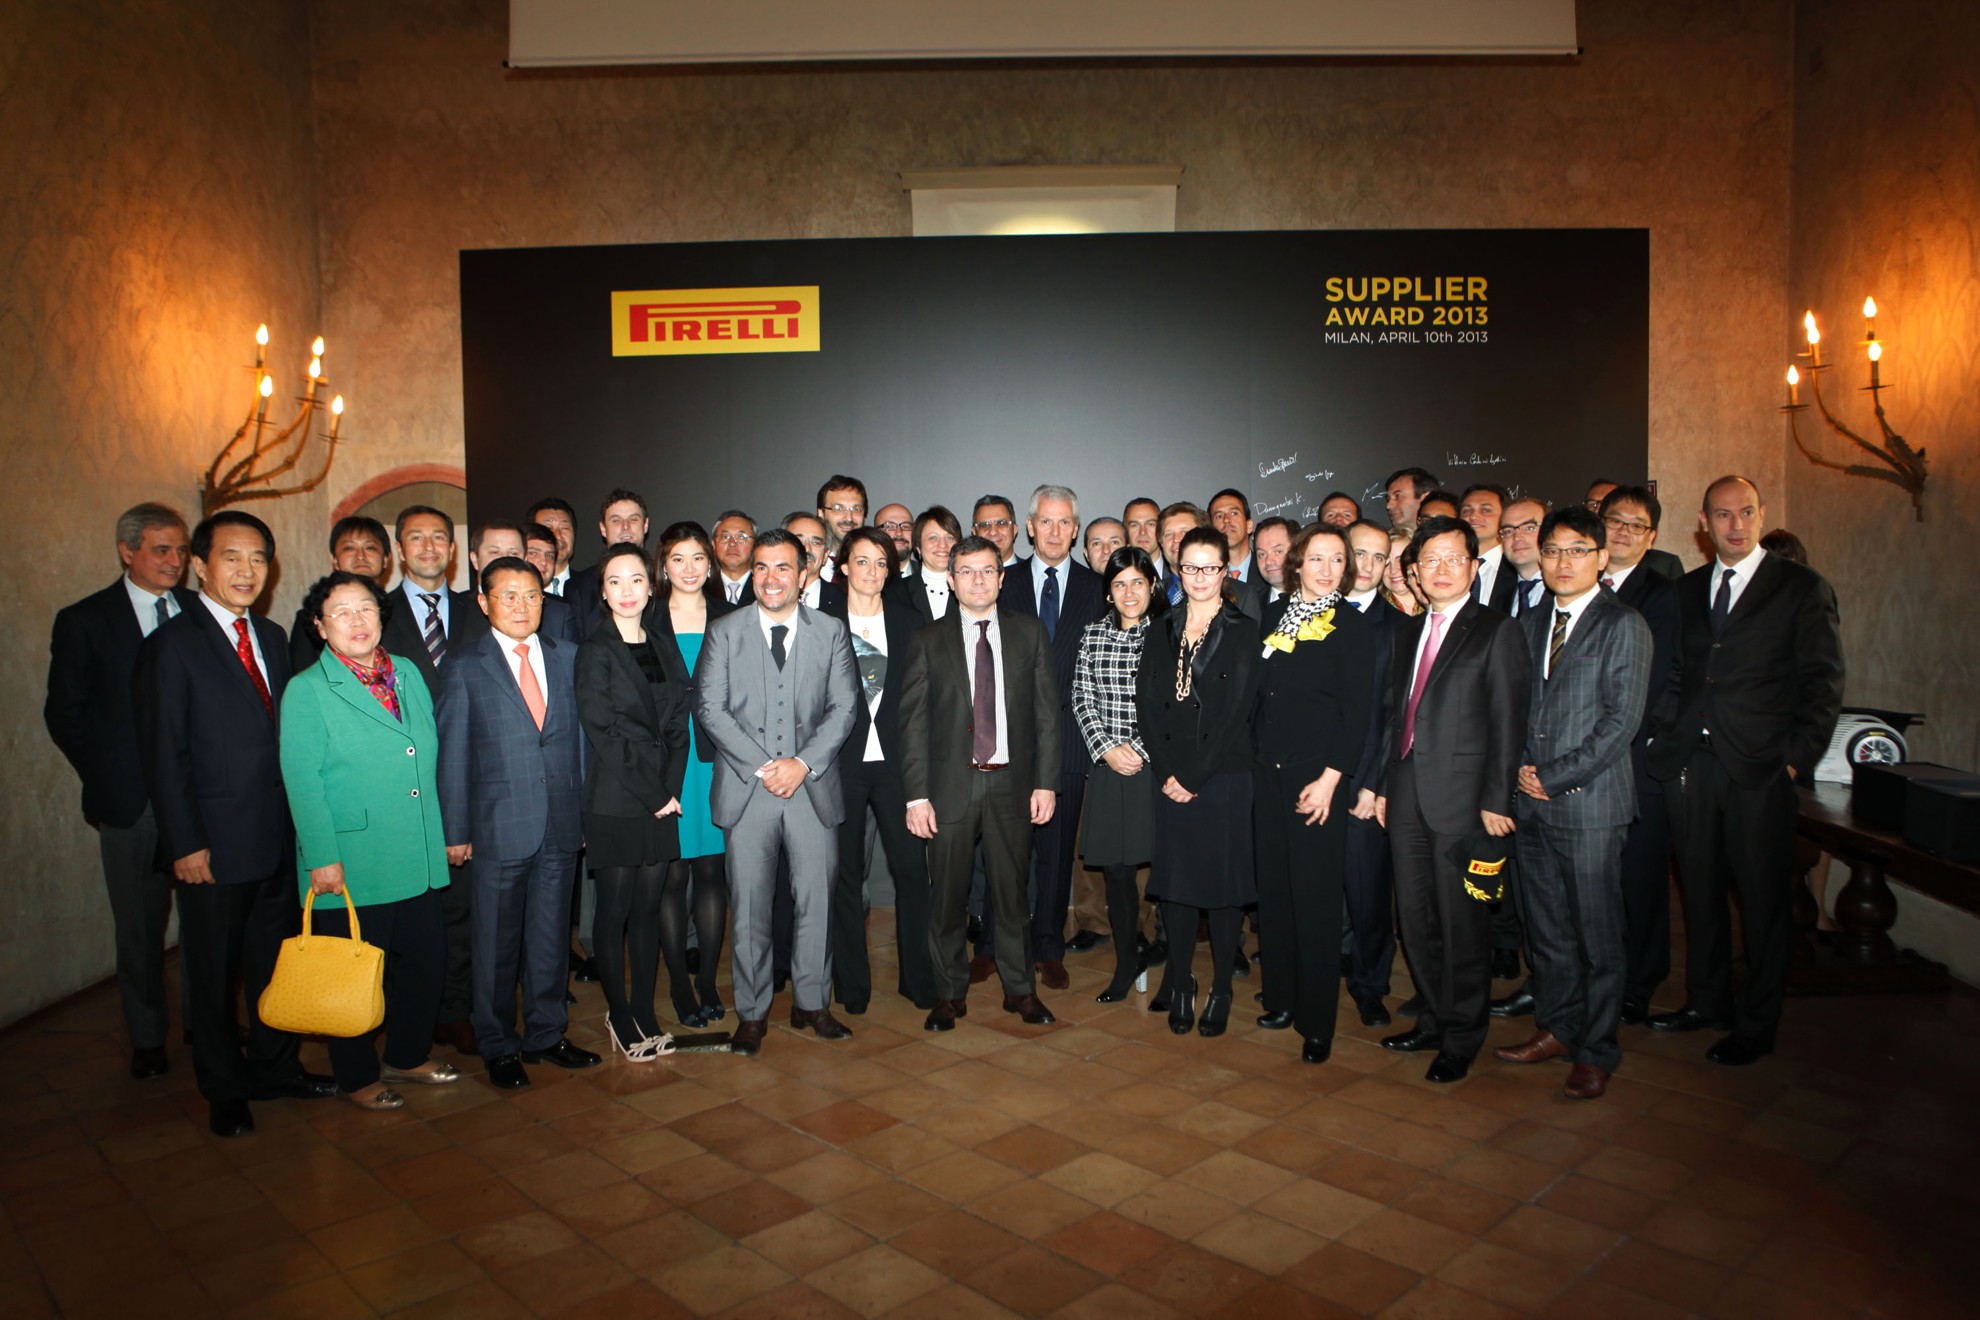 PIRELLI AWARDS THE NINE BEST SUPPLIERS OF 2012